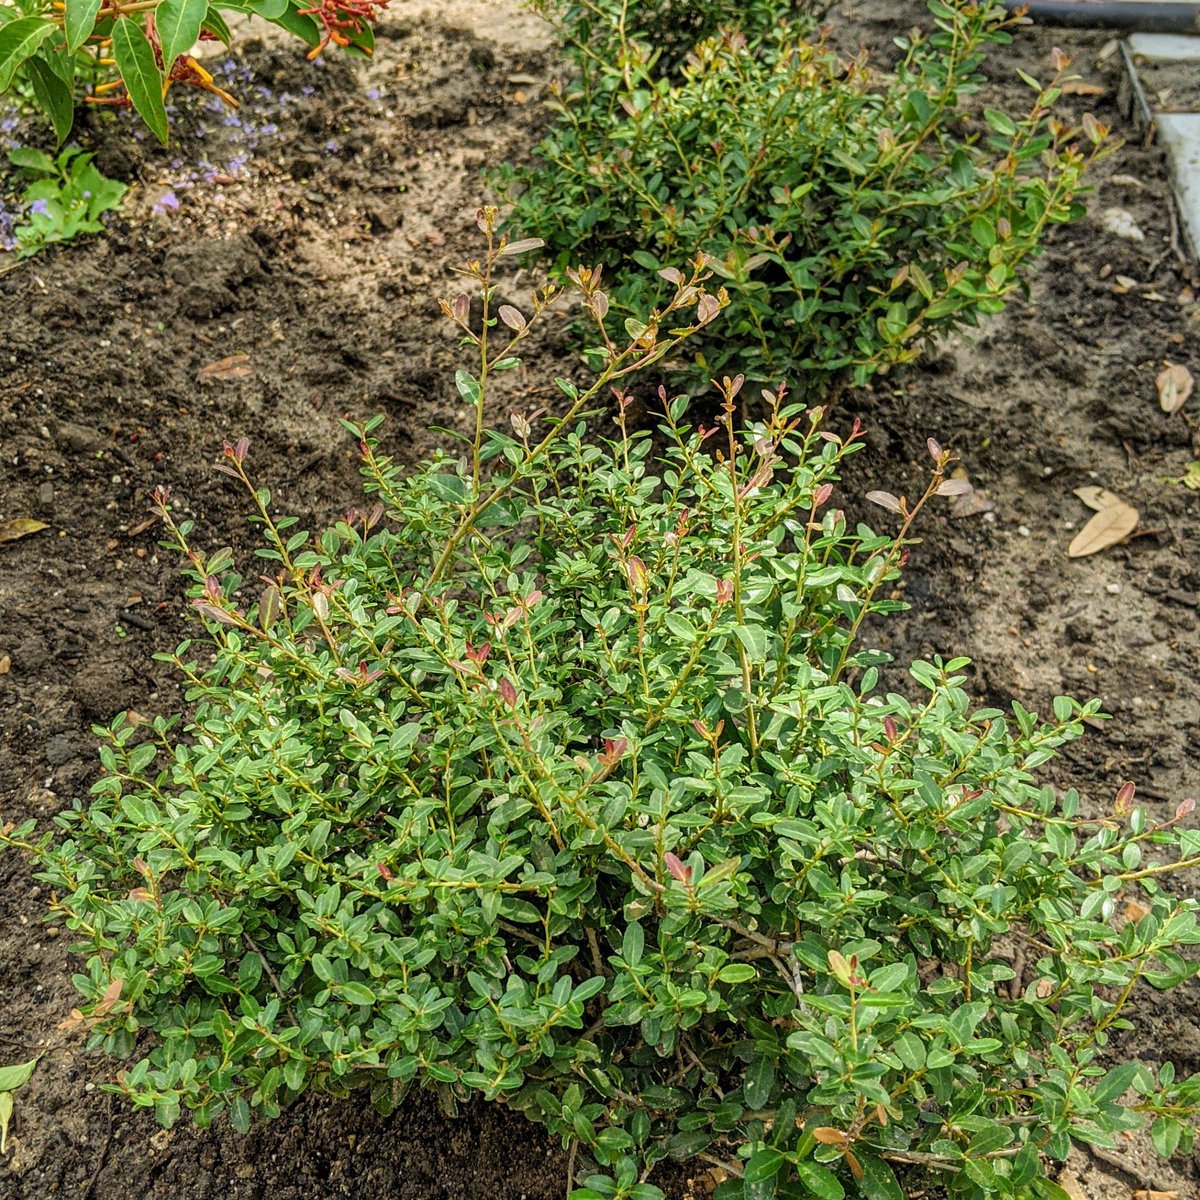 Dwarf Yaupon - Ilex vomitoria 'Nana'One of my favorite native plants because it was important to the Native Americans... and because it's name is VOMITORIA. (look it up)There's local variant called "Pride of Houston" - I'm definitely adding that.